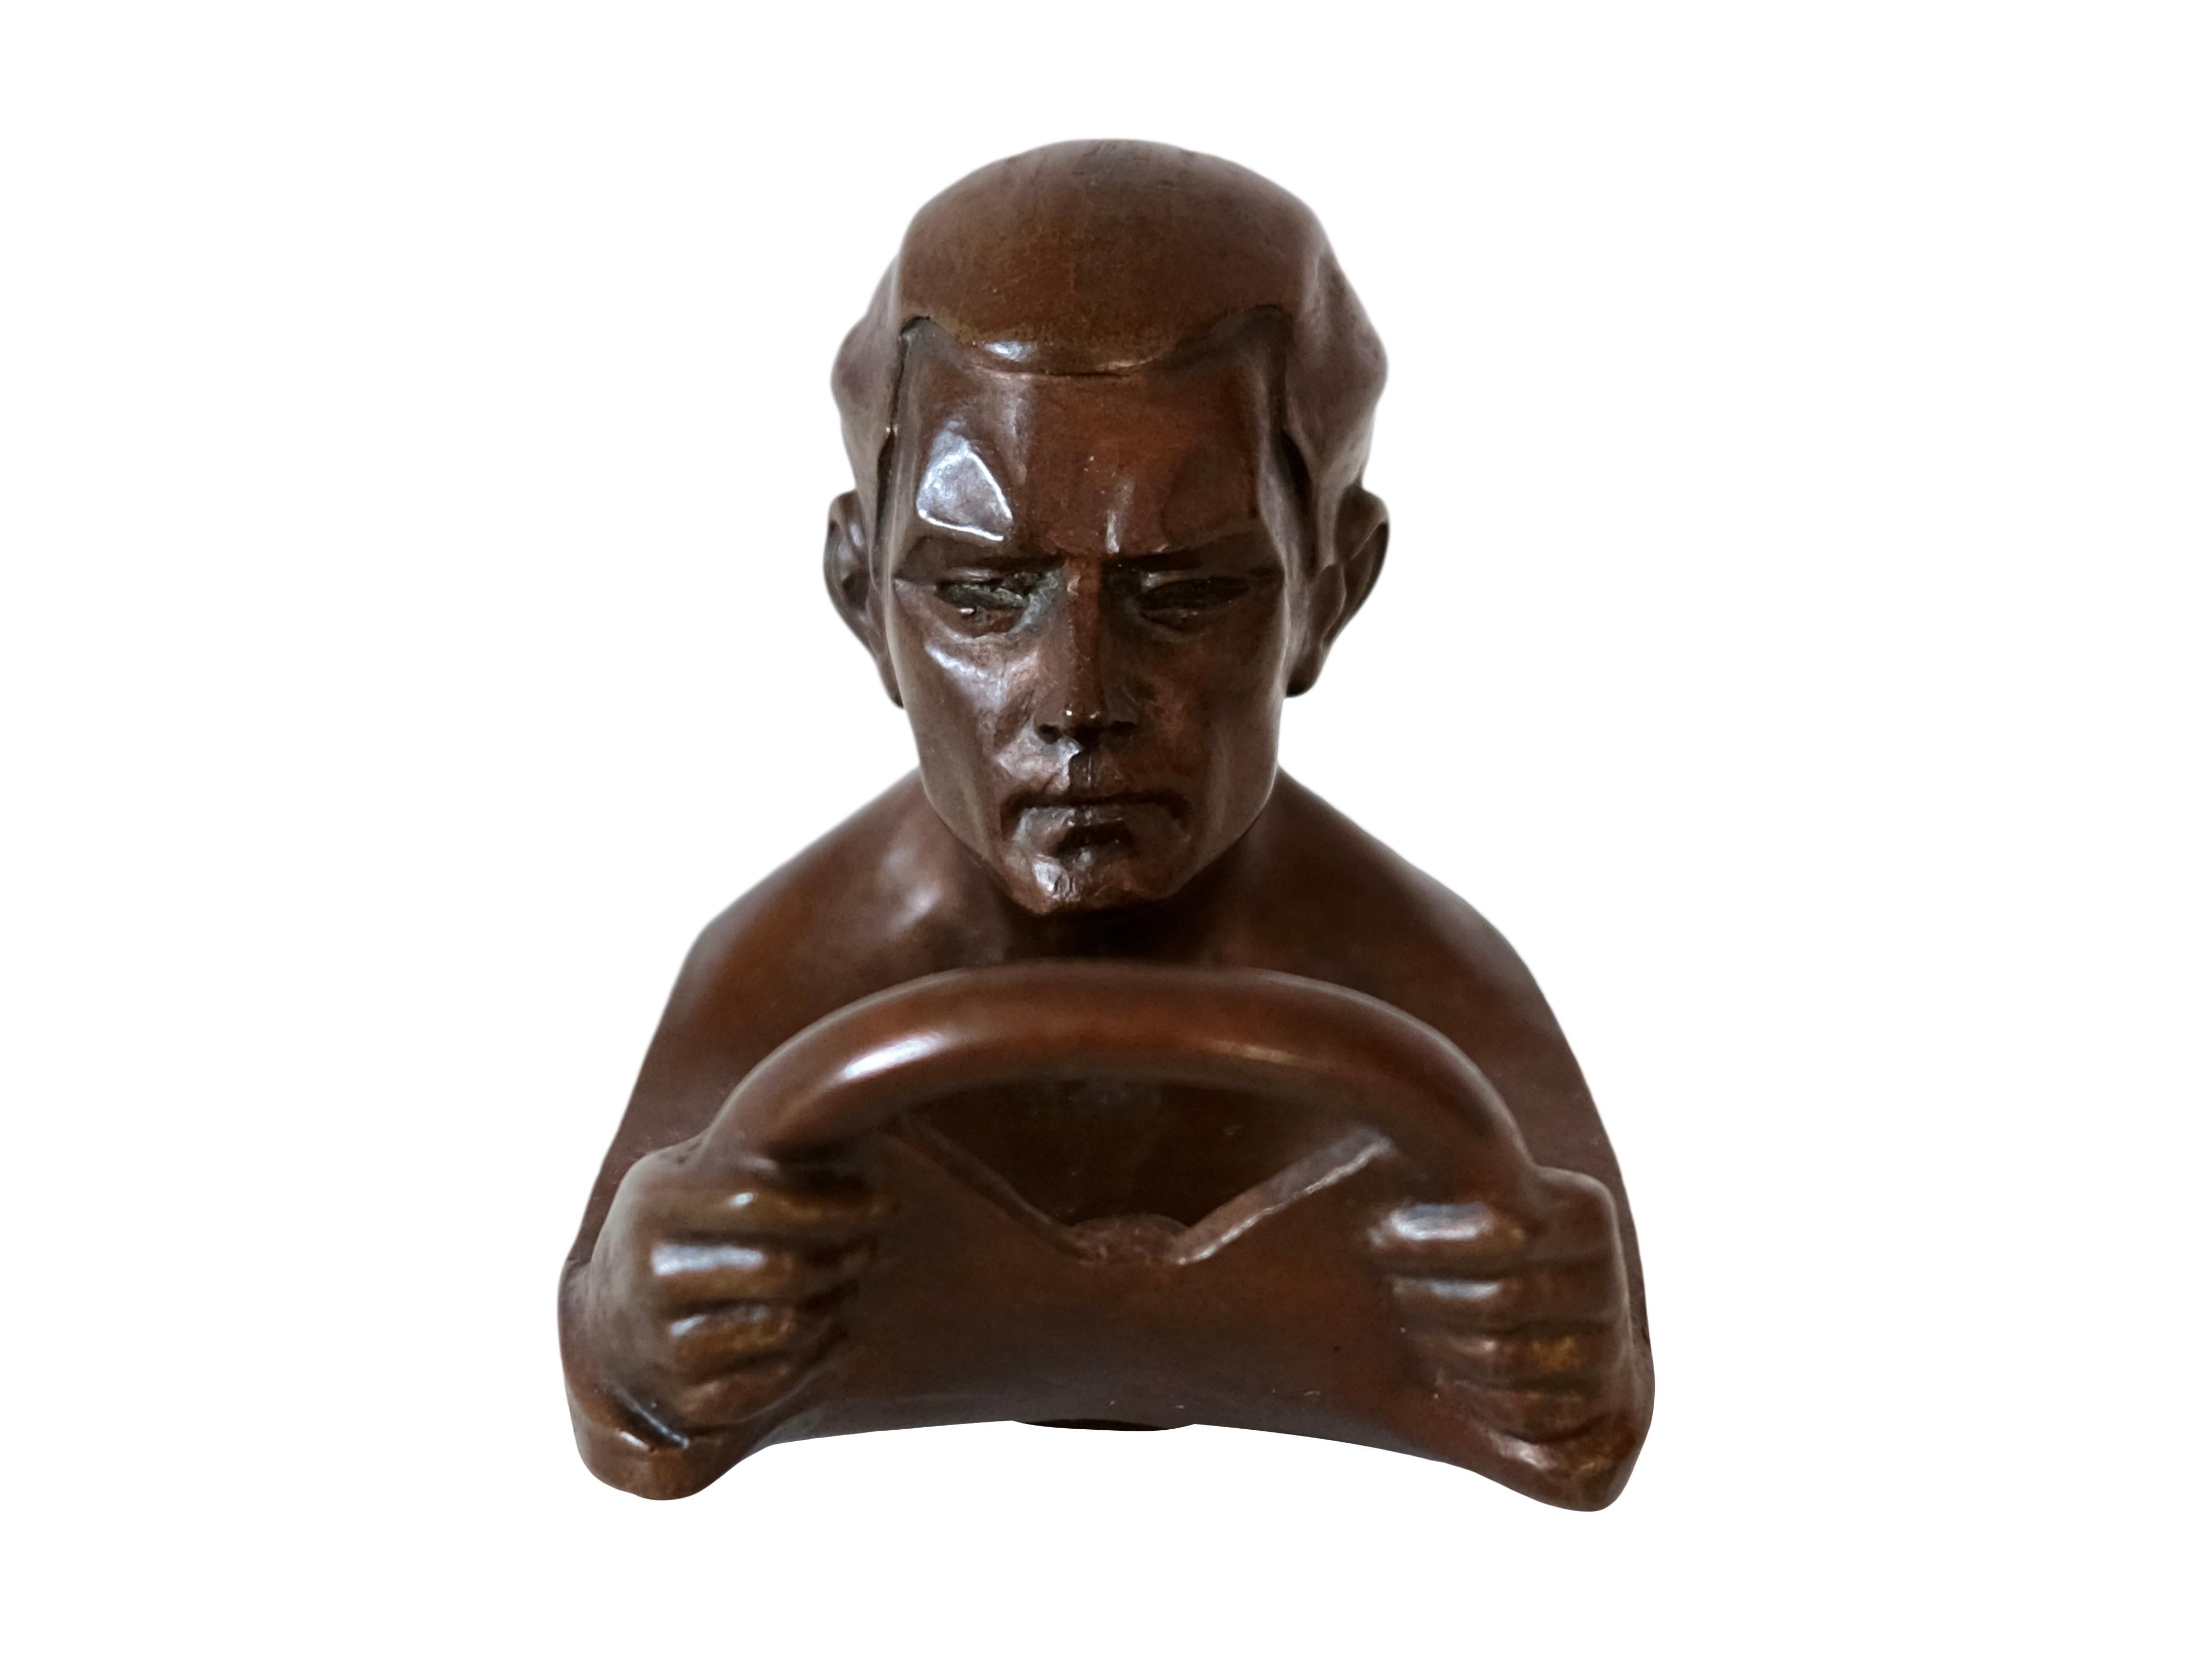 This Radiator Mascot is not only for collectors. 
The car driver is a decorative paperweight on your desk. 
Beautiful gift for car fans and passionated old-timer or sport-car drivers. 

Max Le Verrier, signed 
Vintage Sculpture in Bronze